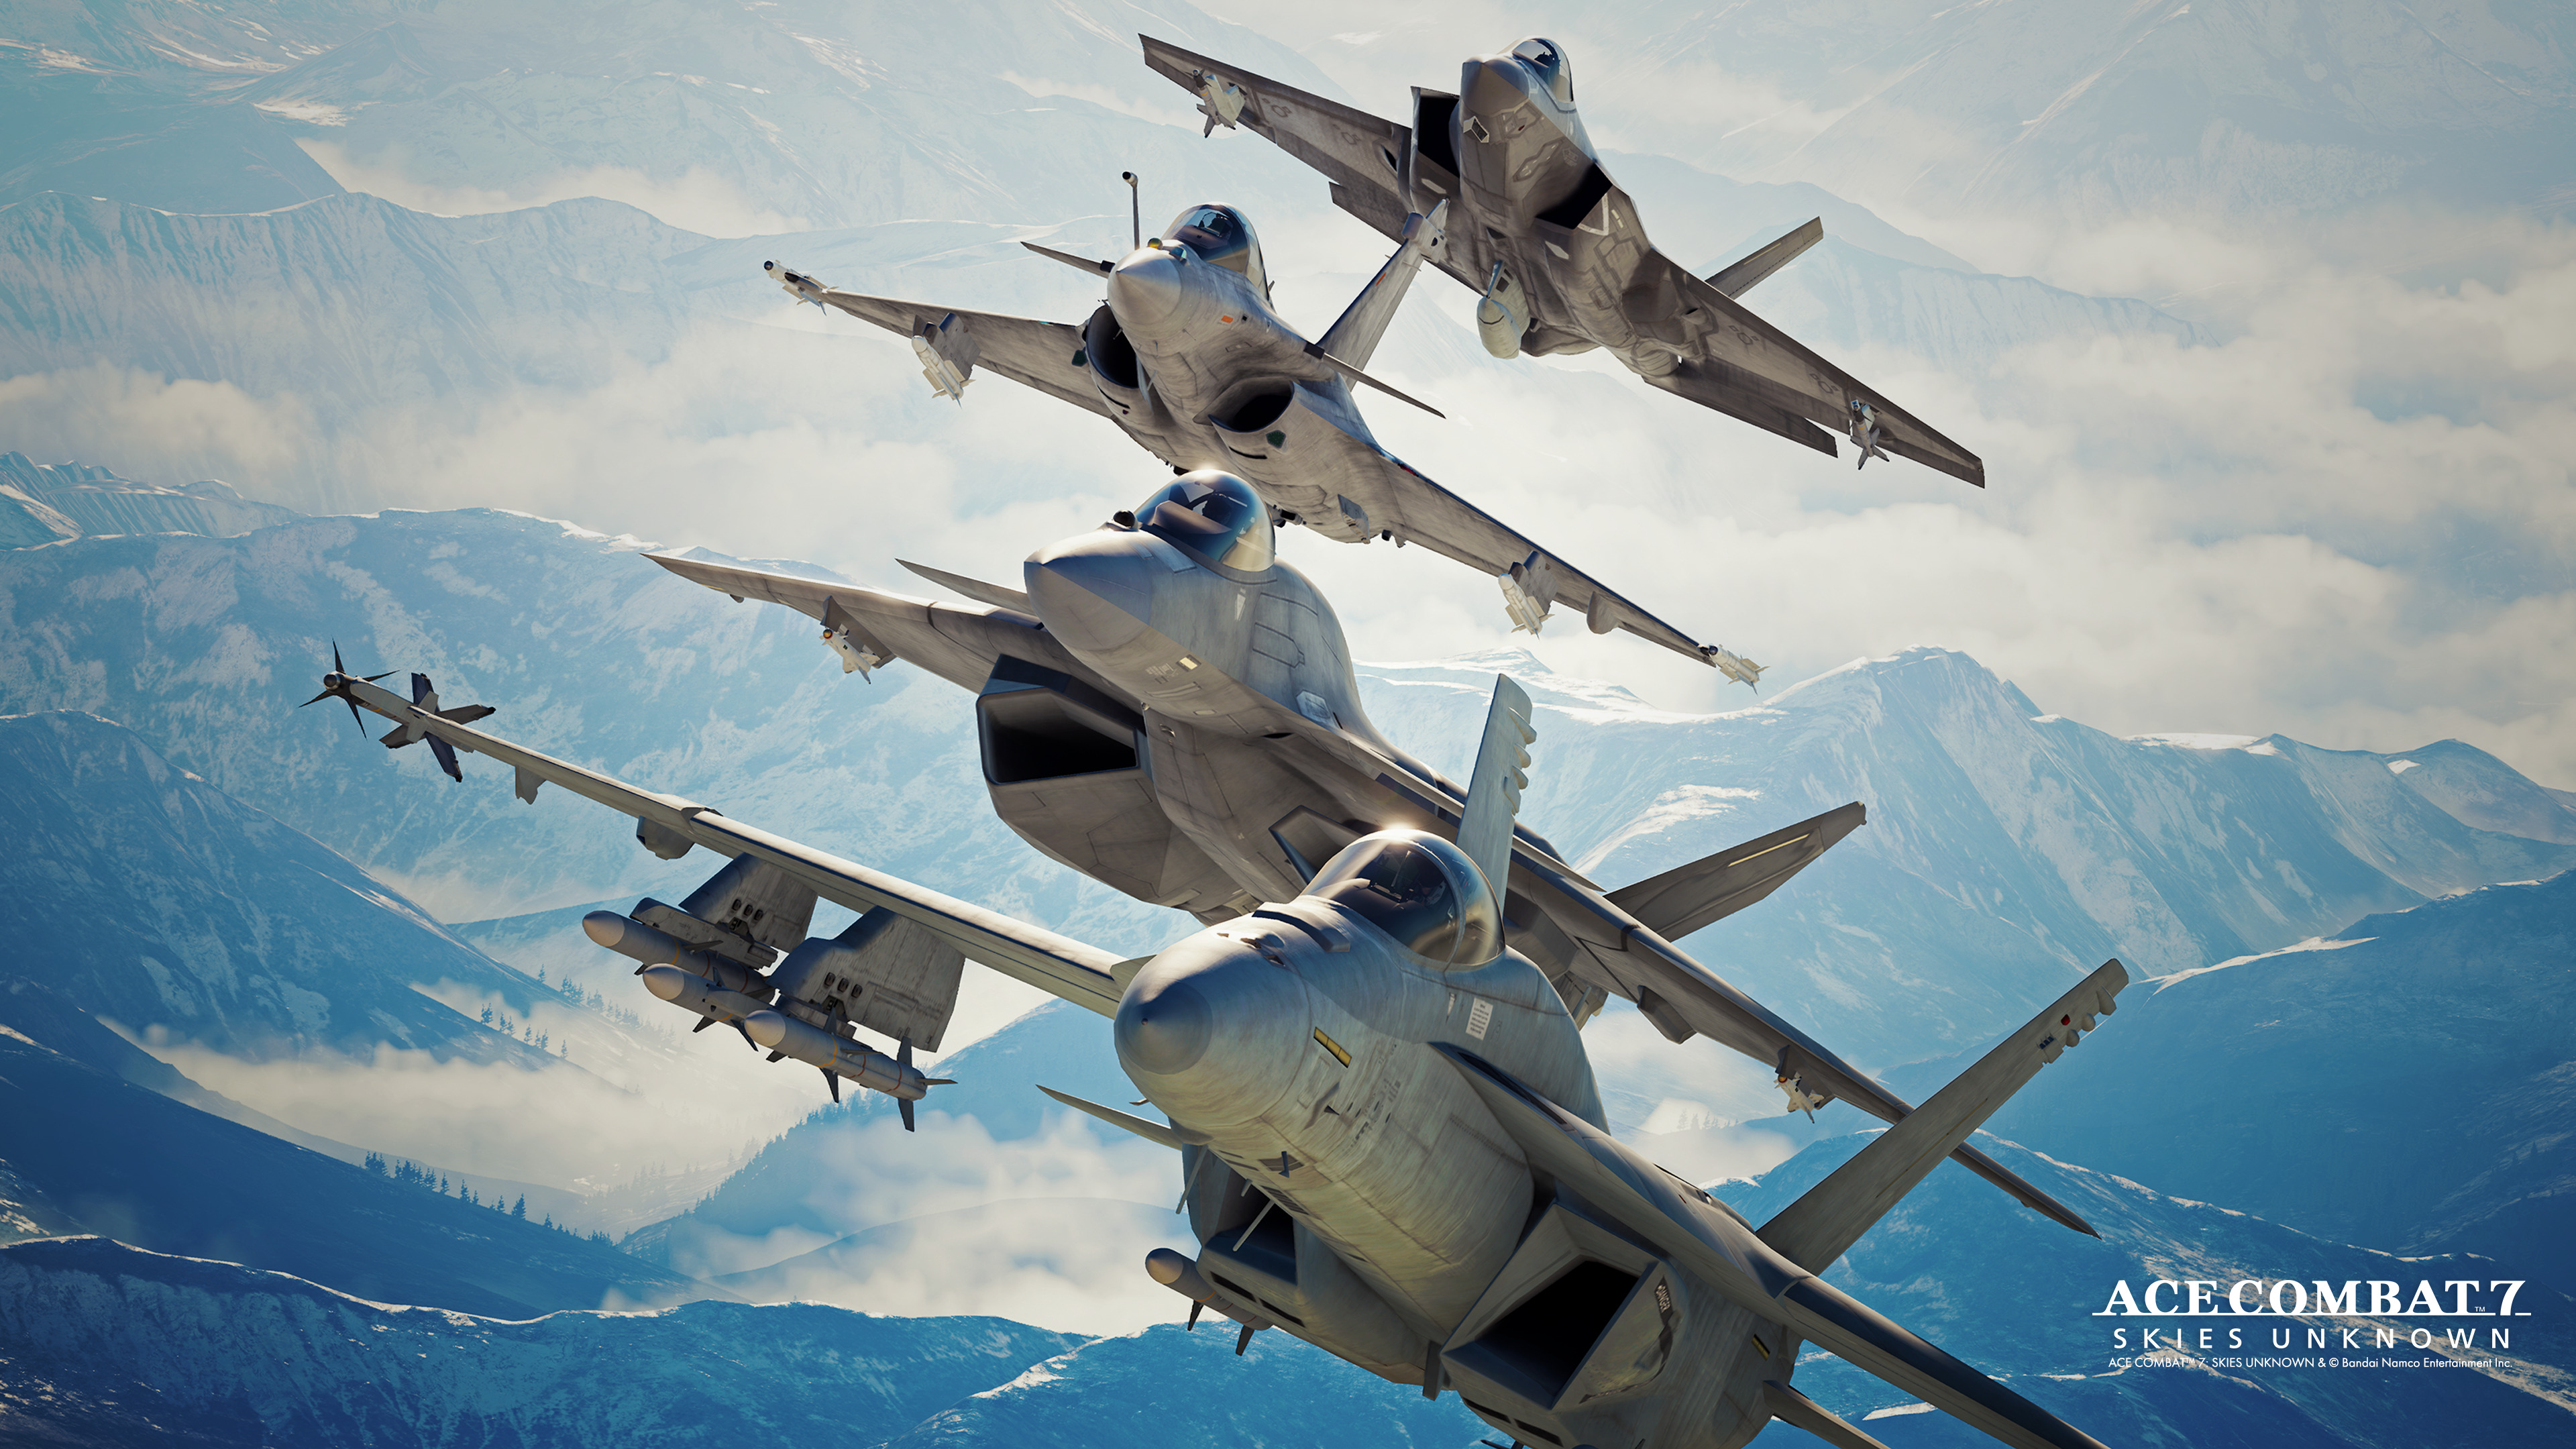 Ace Combat 7' Review: It's Time To Return To The Intense World Of